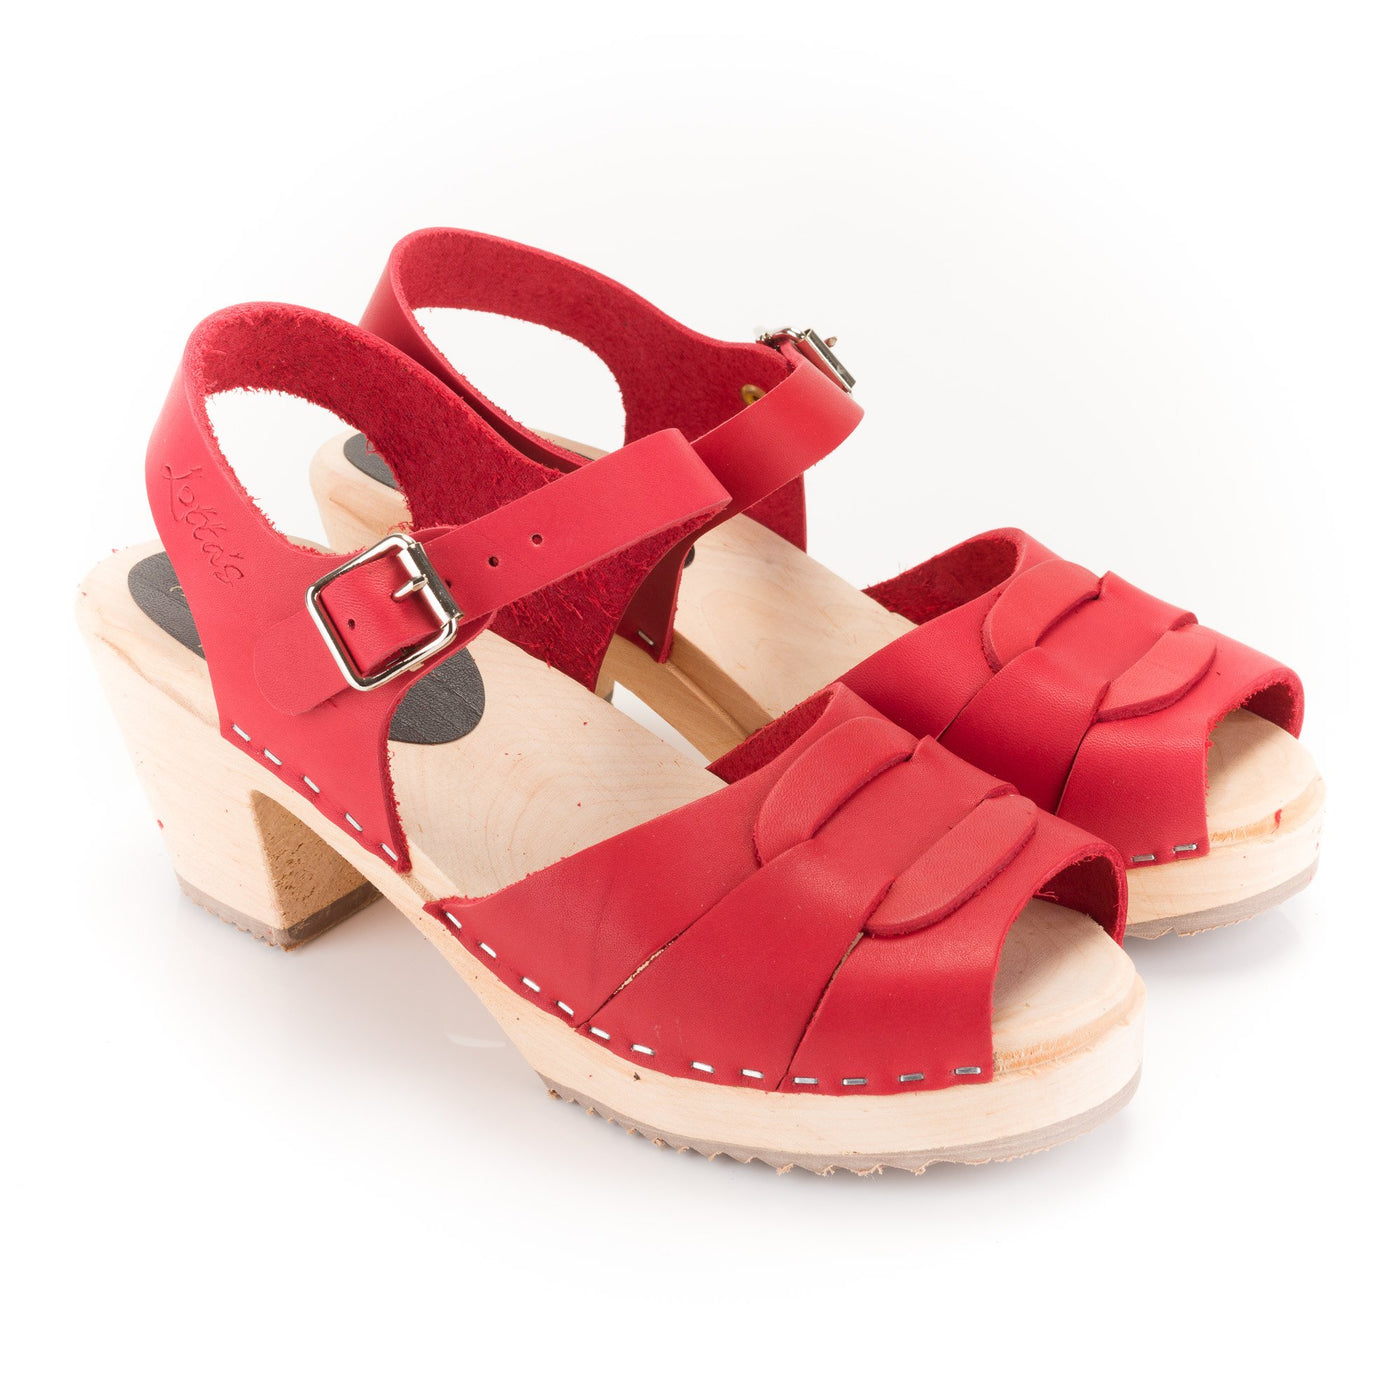 Red Peep Toe Clogs by Lotta from Stockholm at Dollydagger